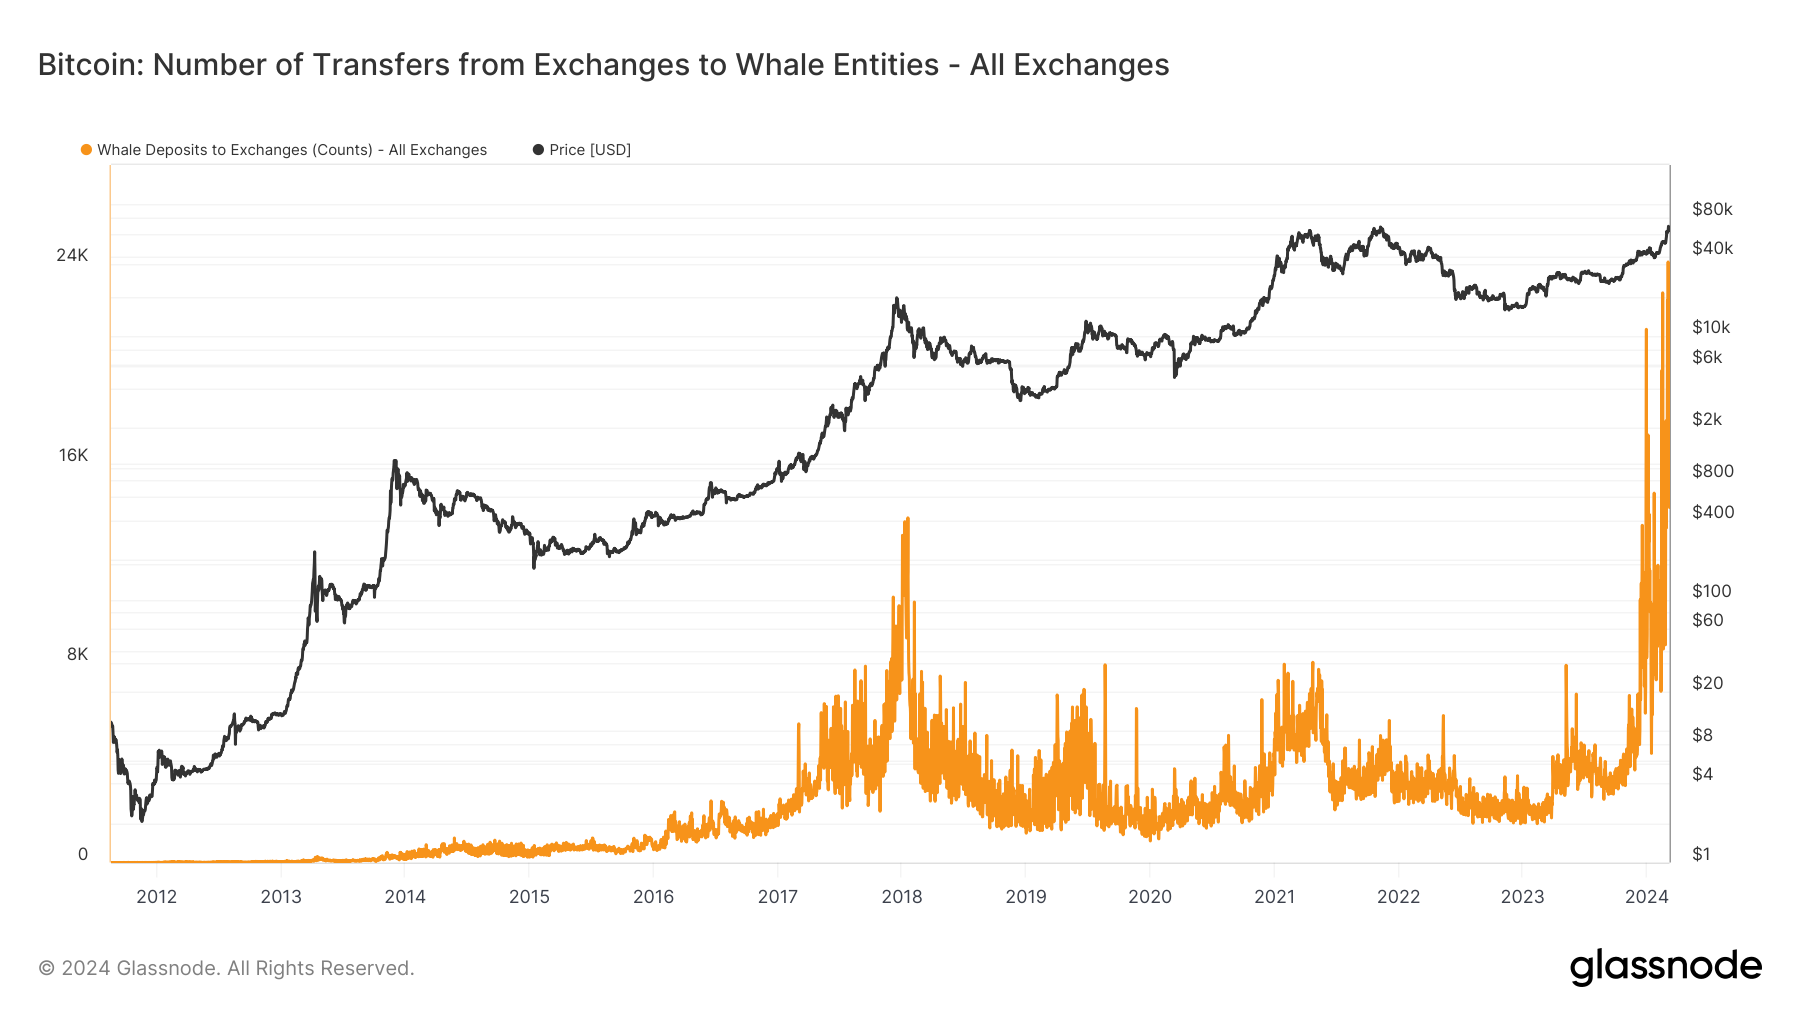 Bitcoin: Number of transfers from exchanges to whales